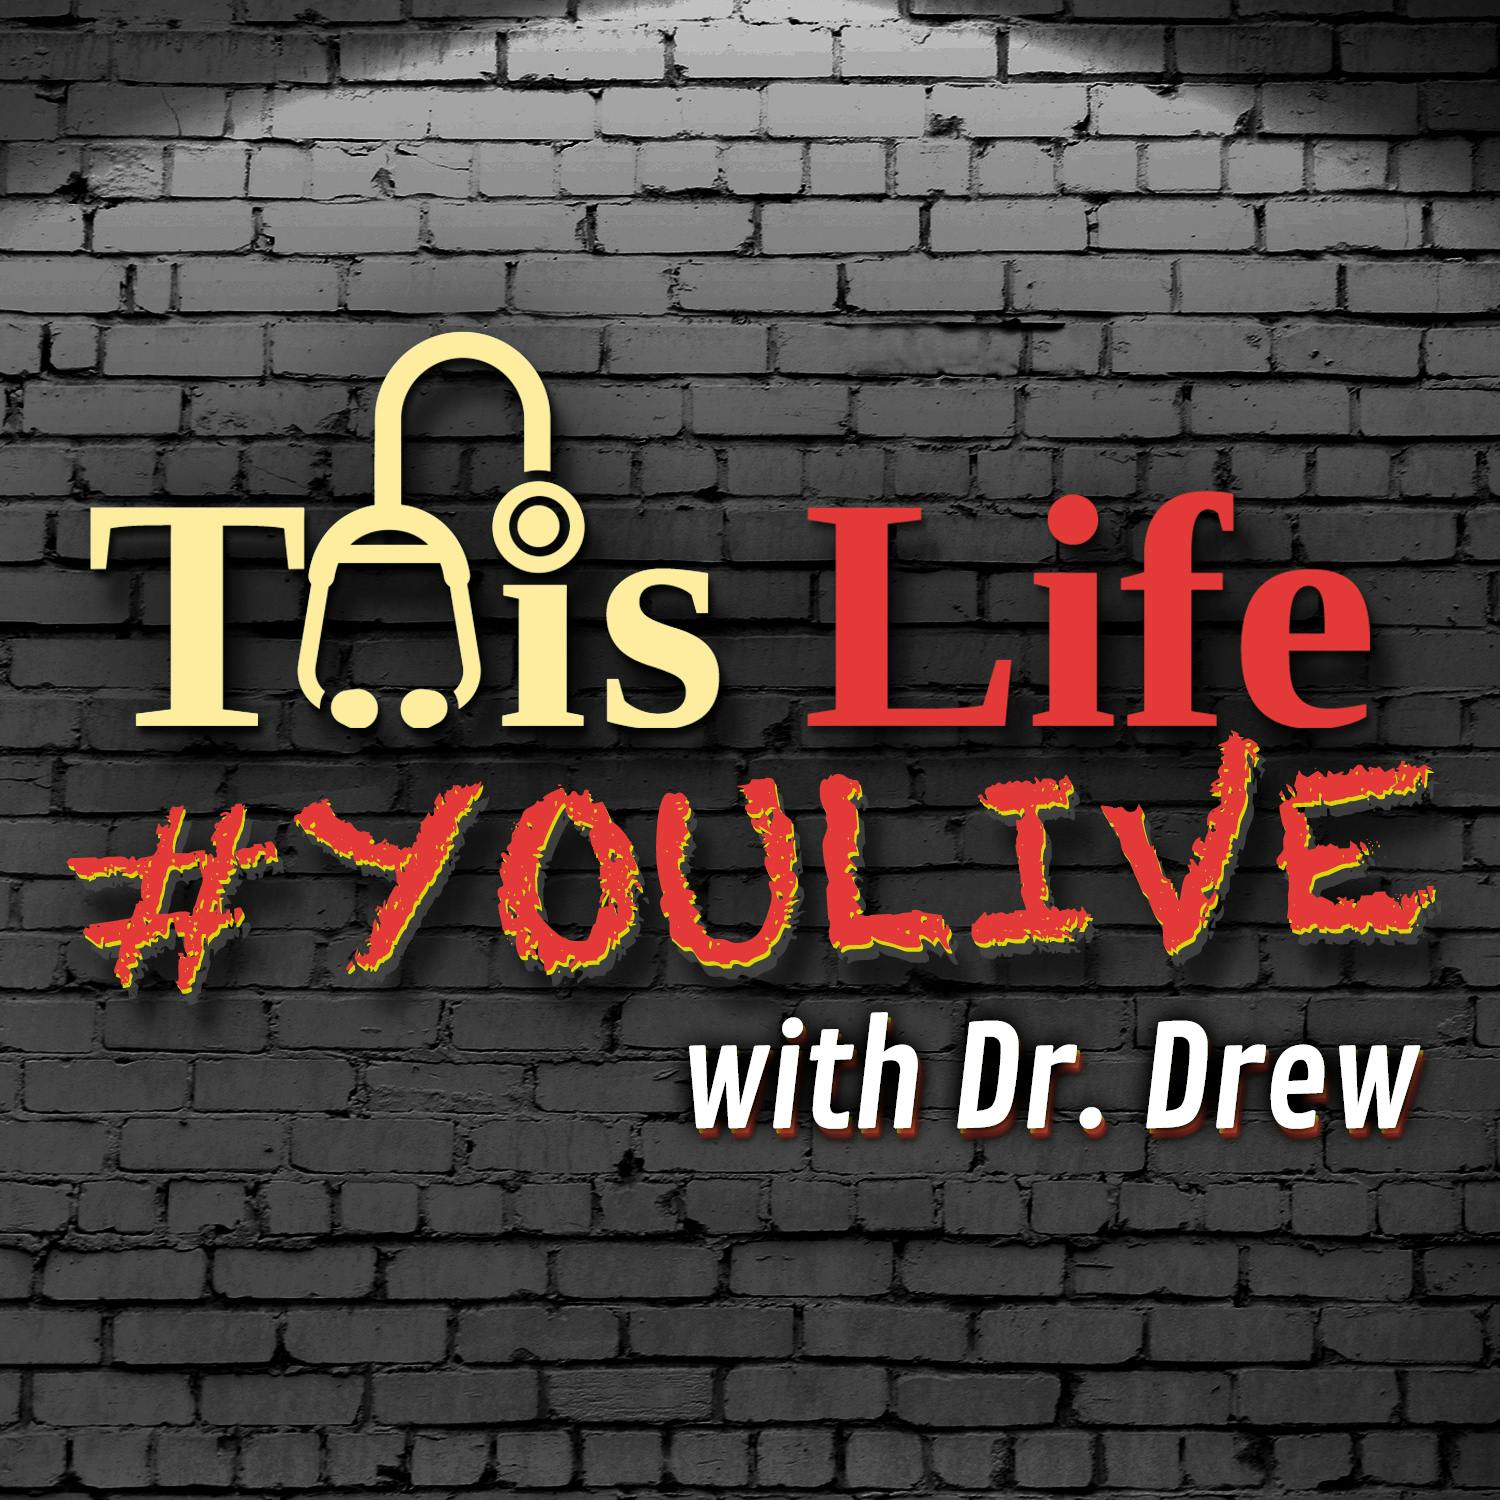 This Life #YOULIVE with Dr. Drew